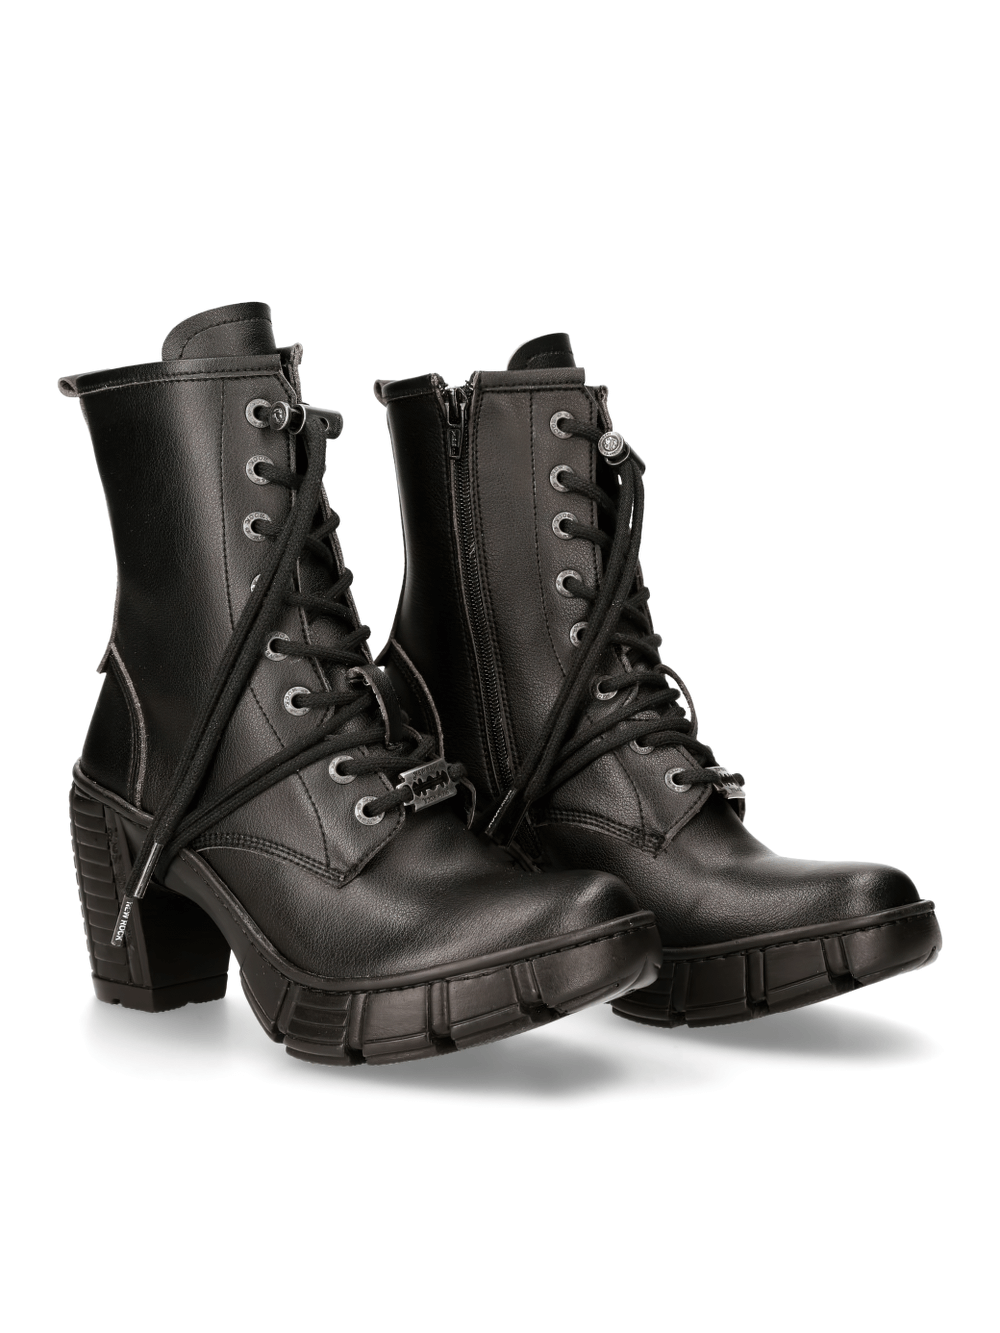 NEW ROCK Edgy Black Ankle Boots with Metallic Accents